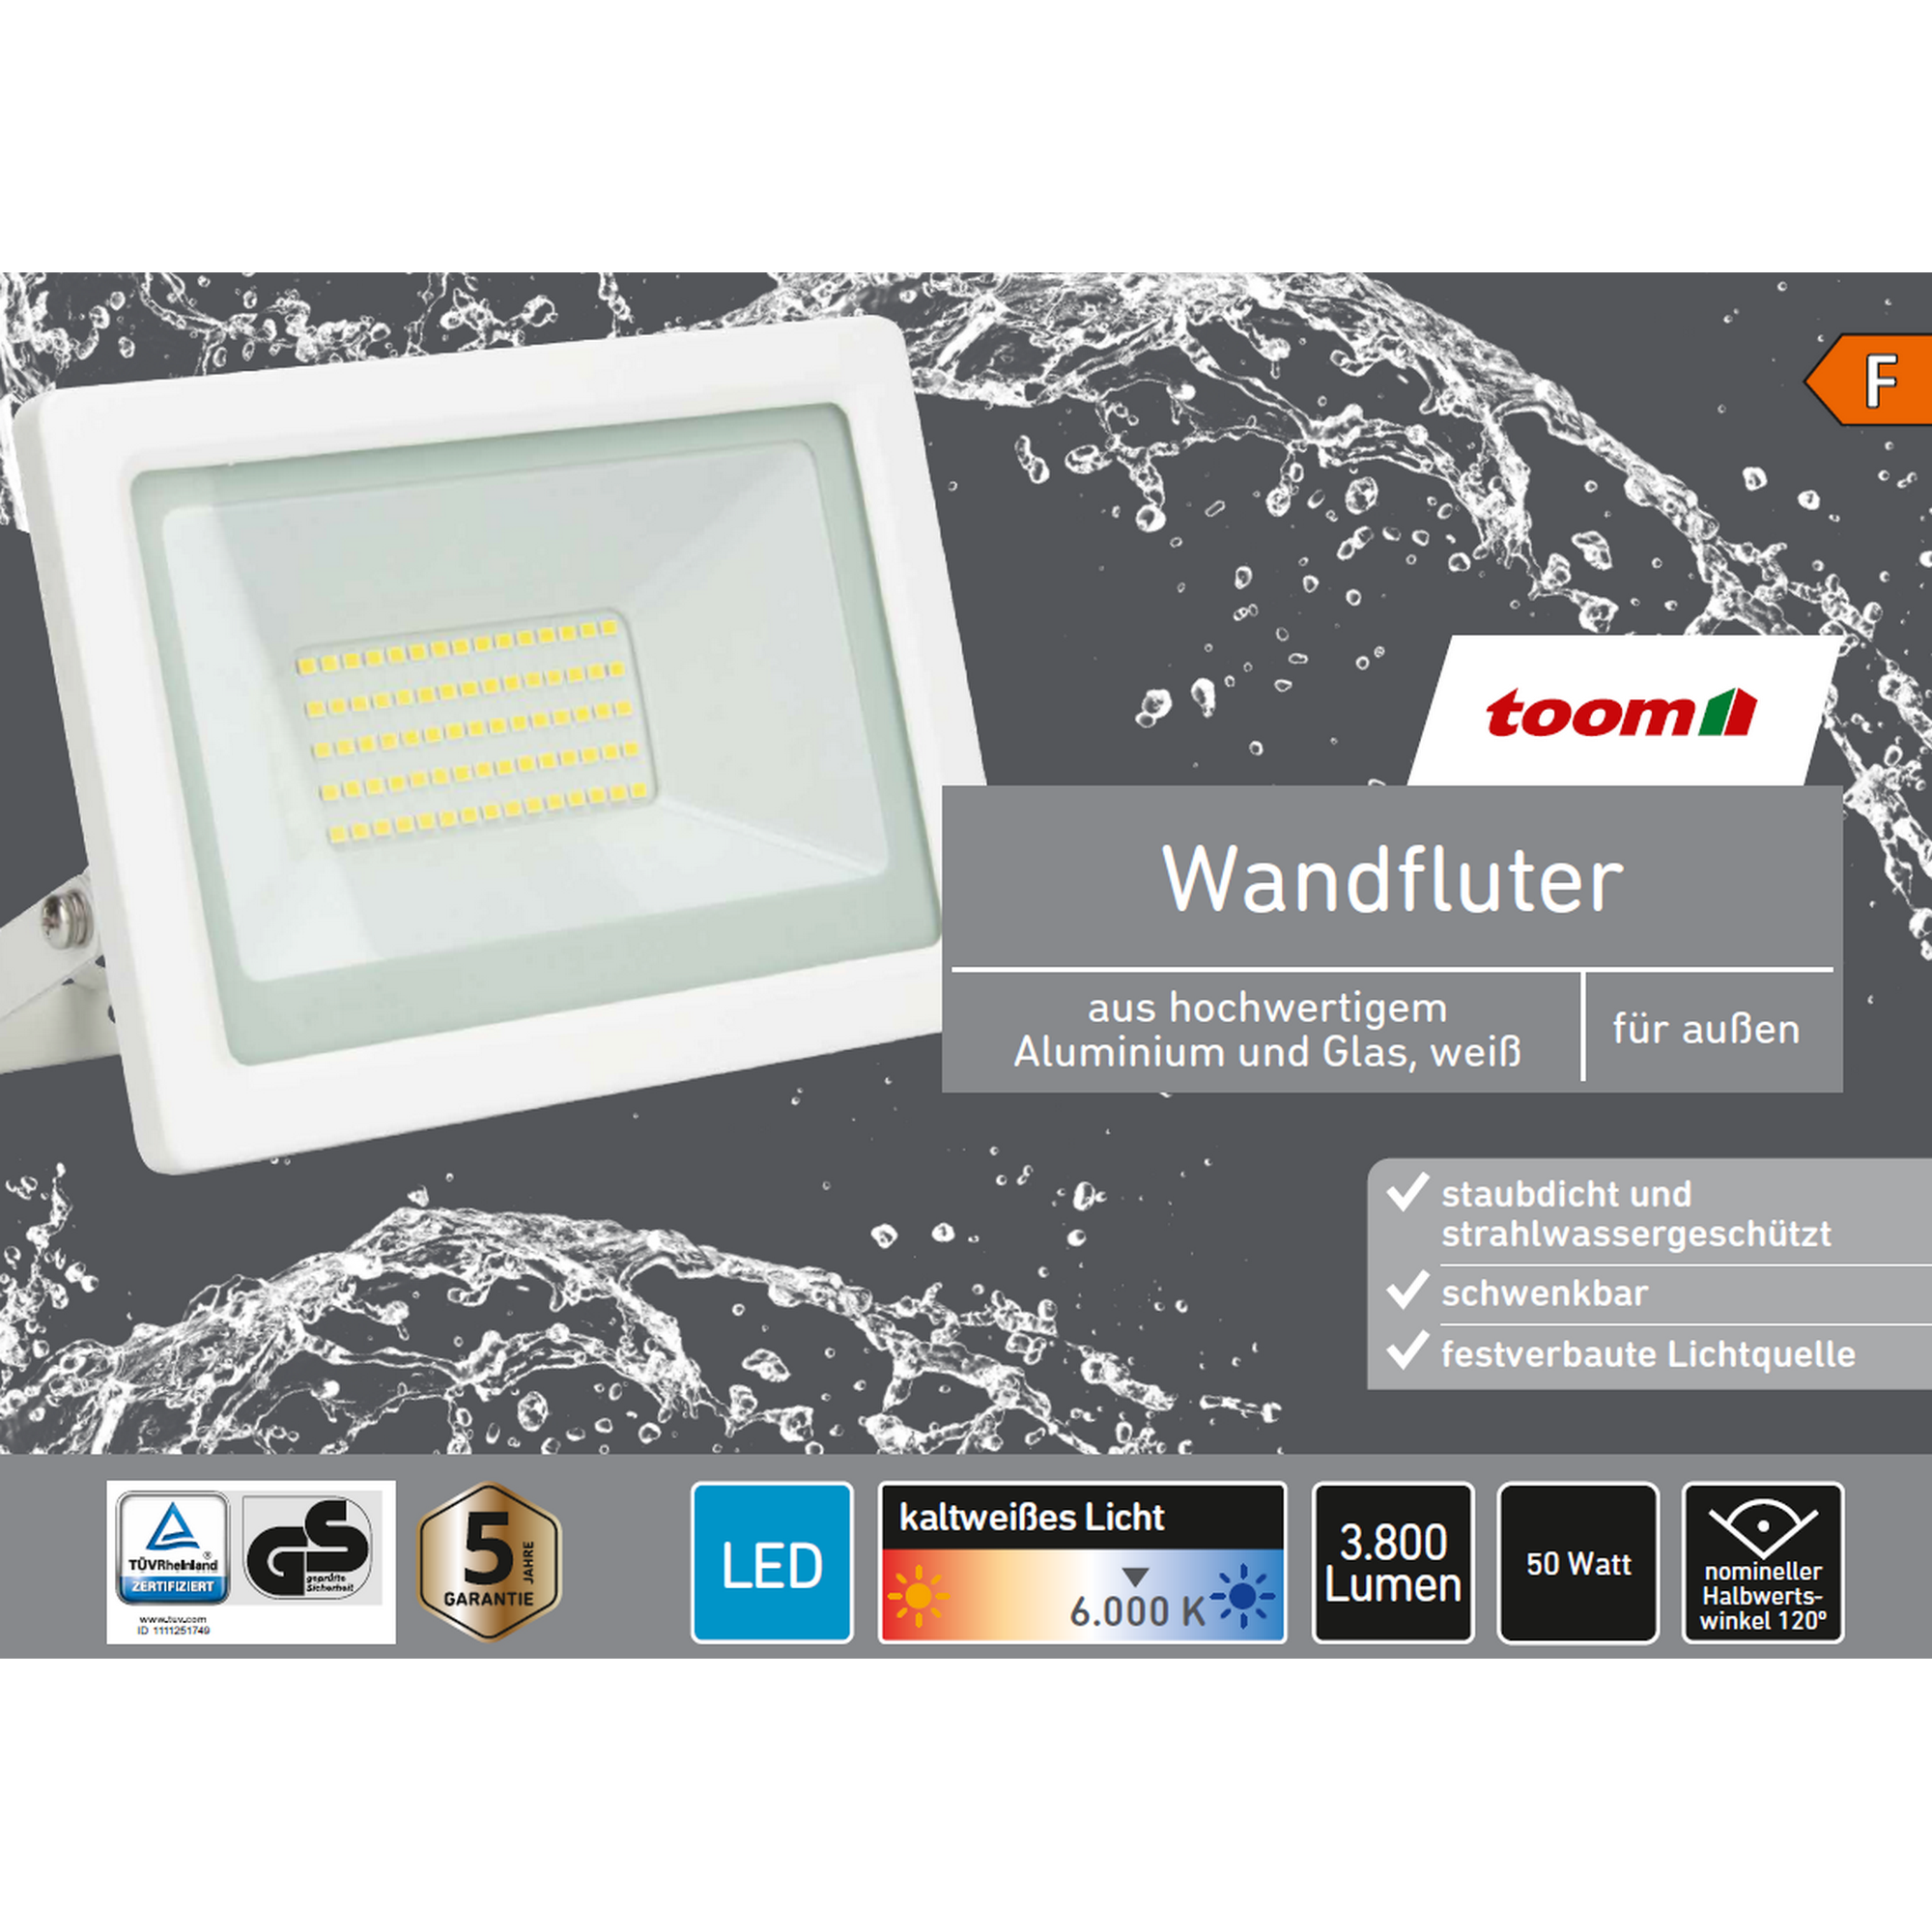 LED-Wandfluter weiß 50 W 3800 lm + product picture